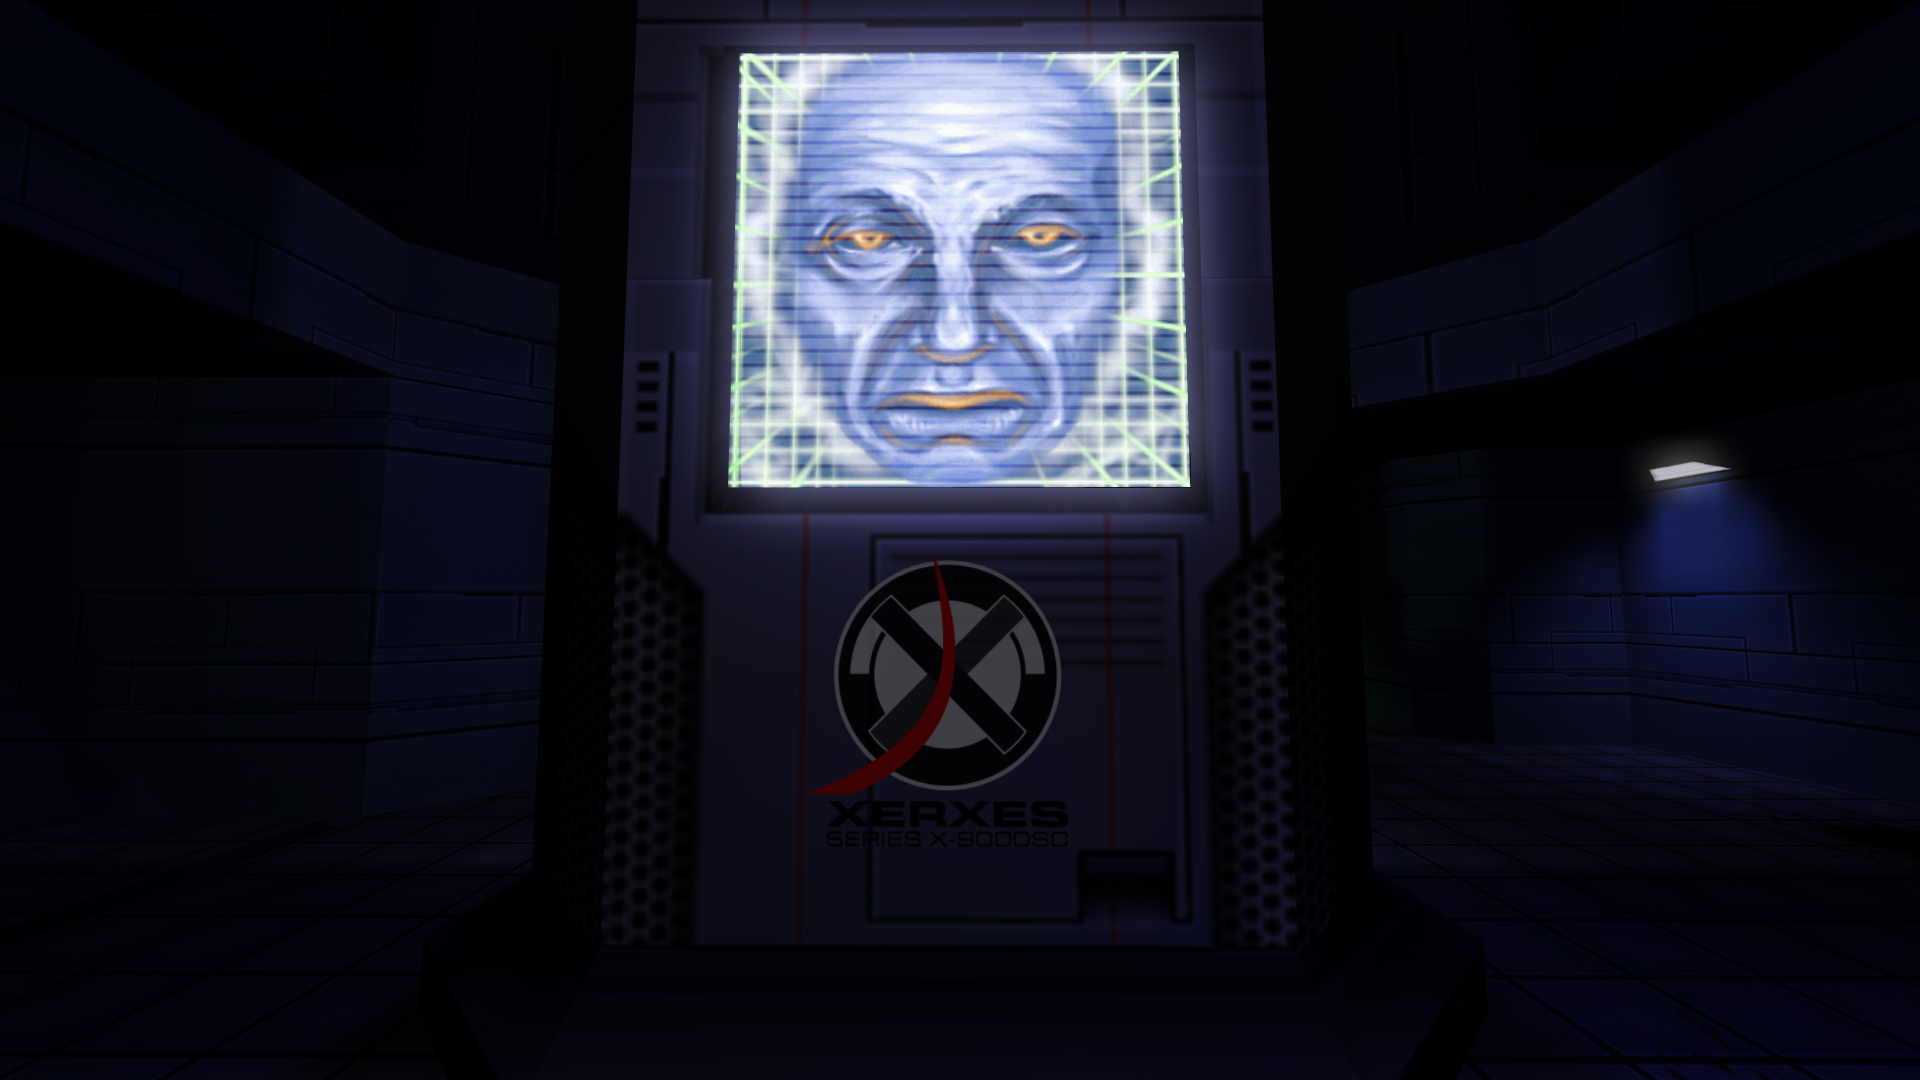 system shock difficulty settings wiki system shock 2 difficulty settings wiki